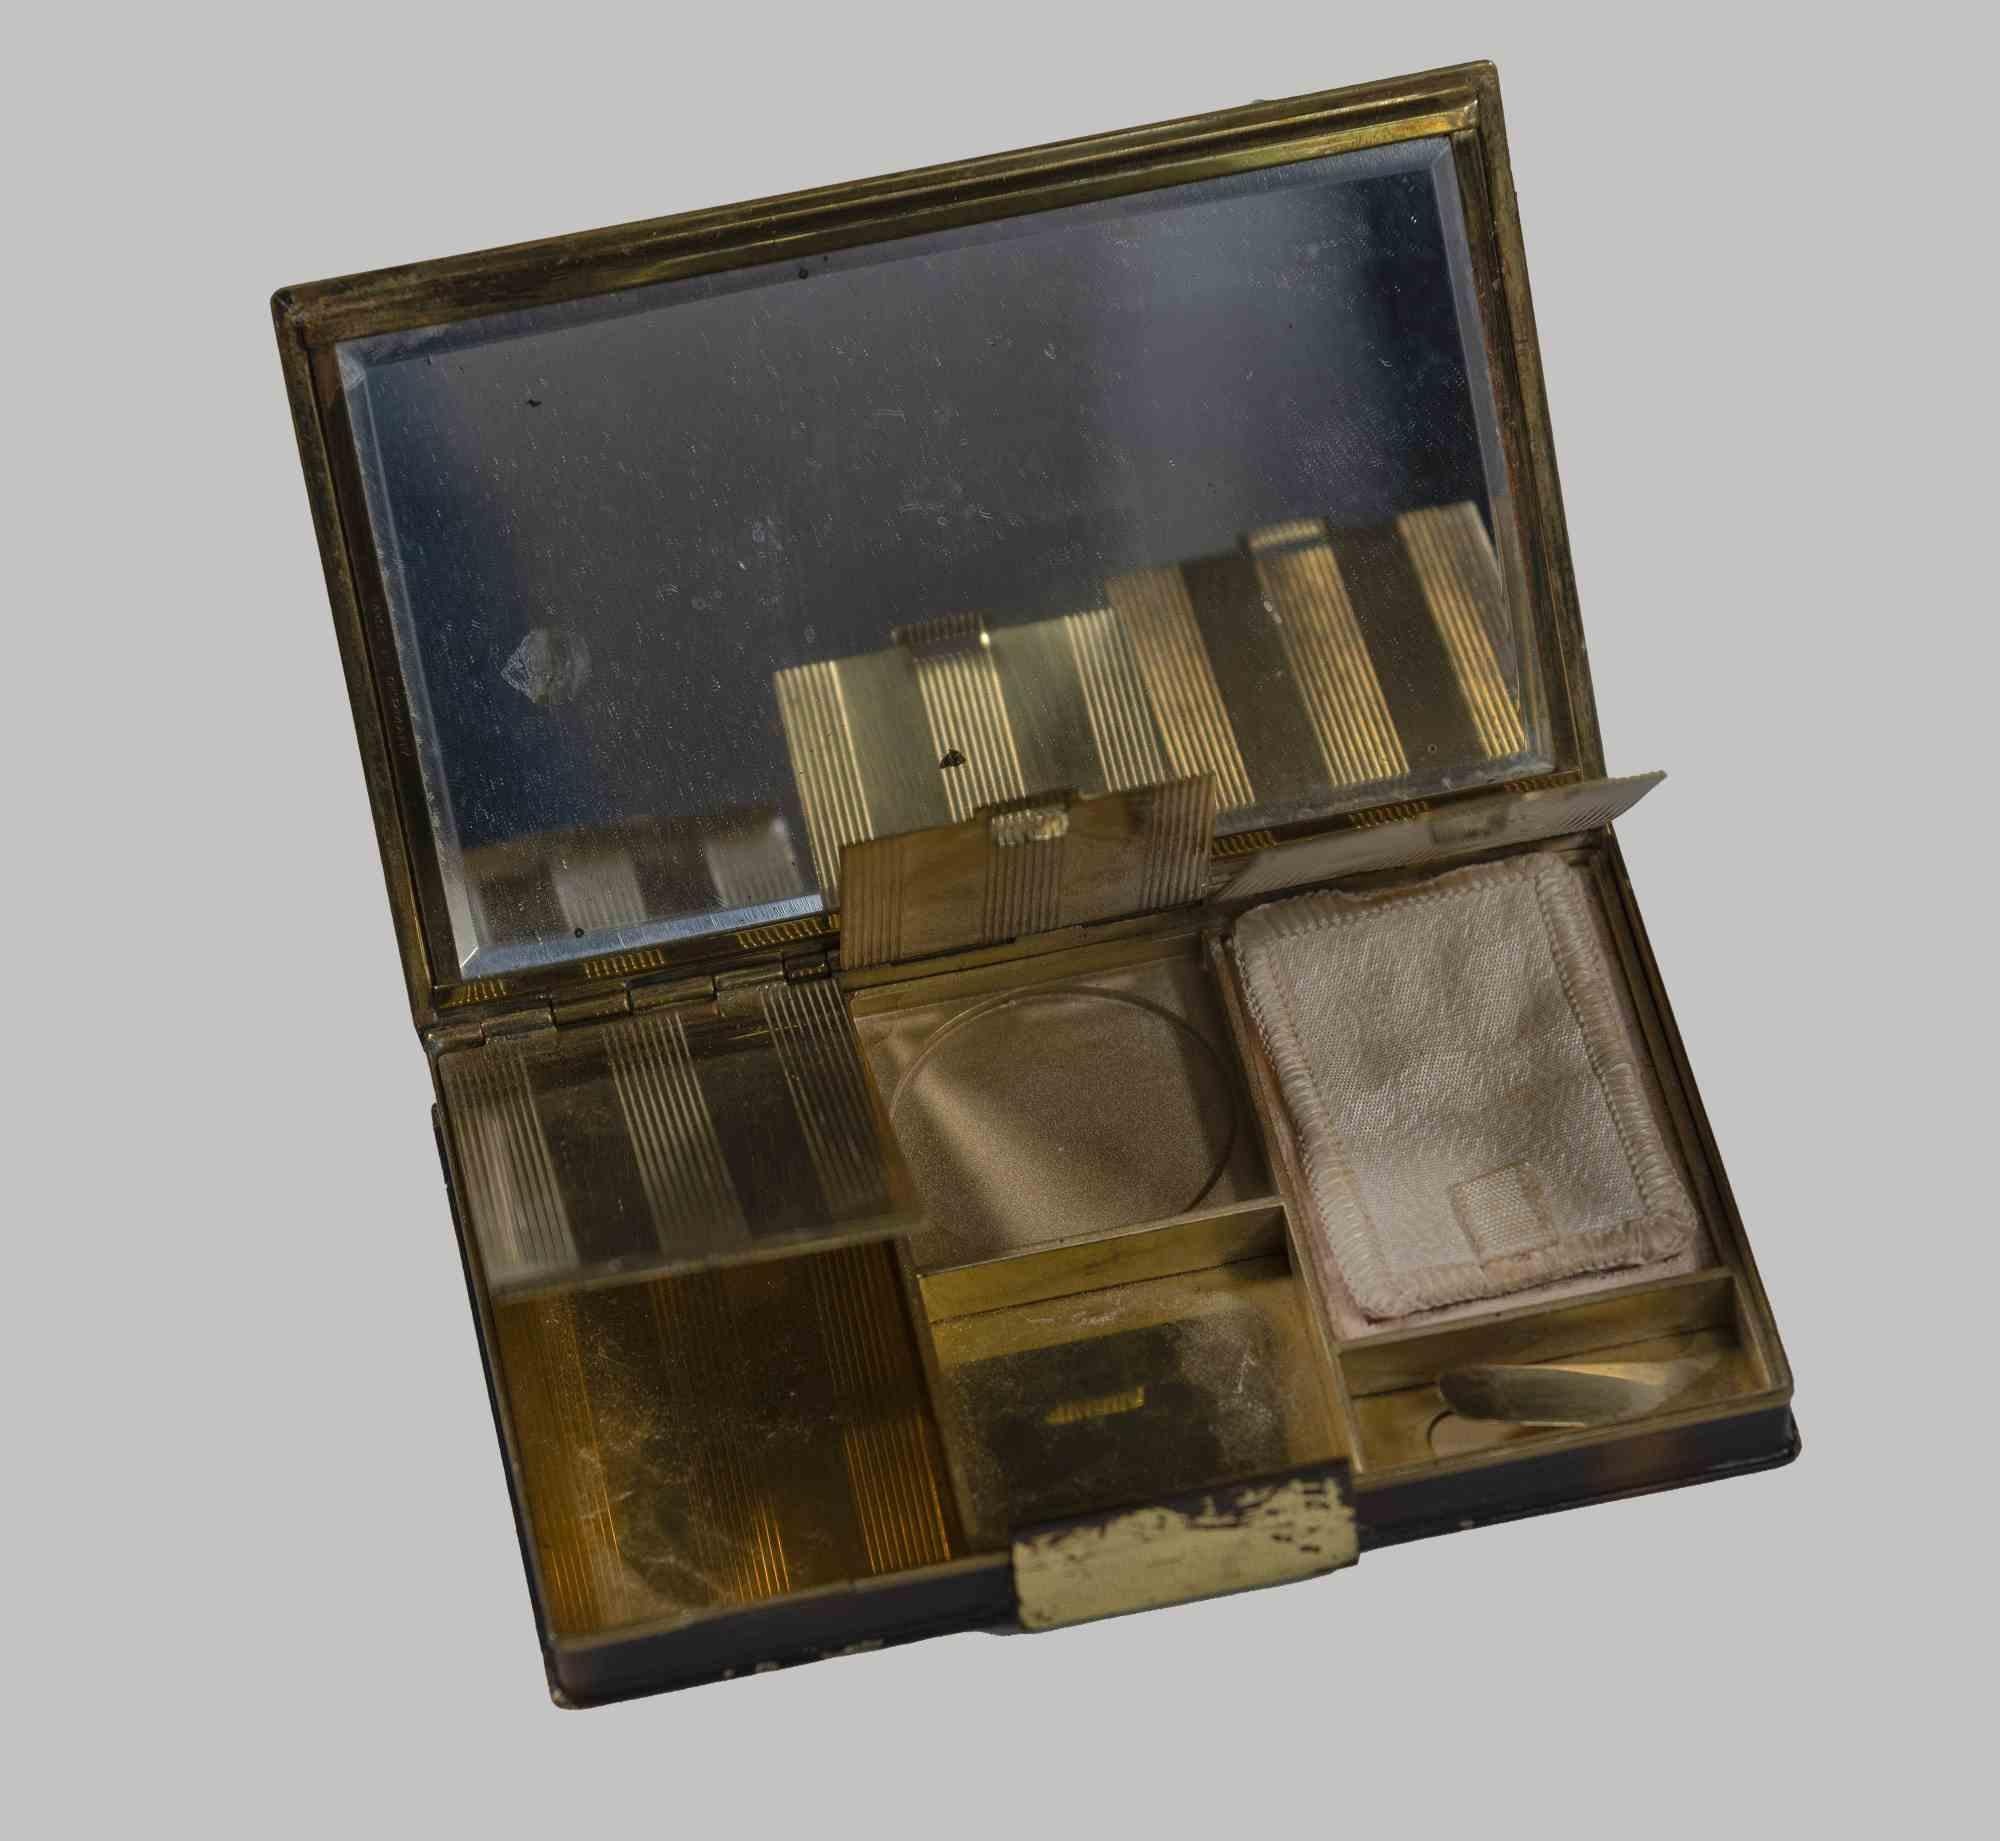 Gilt bronze trousse with tree branch decorations. France 1930.

Lid with tortoiseshell base. Inside three compartments for make-up.

Good conditions.

